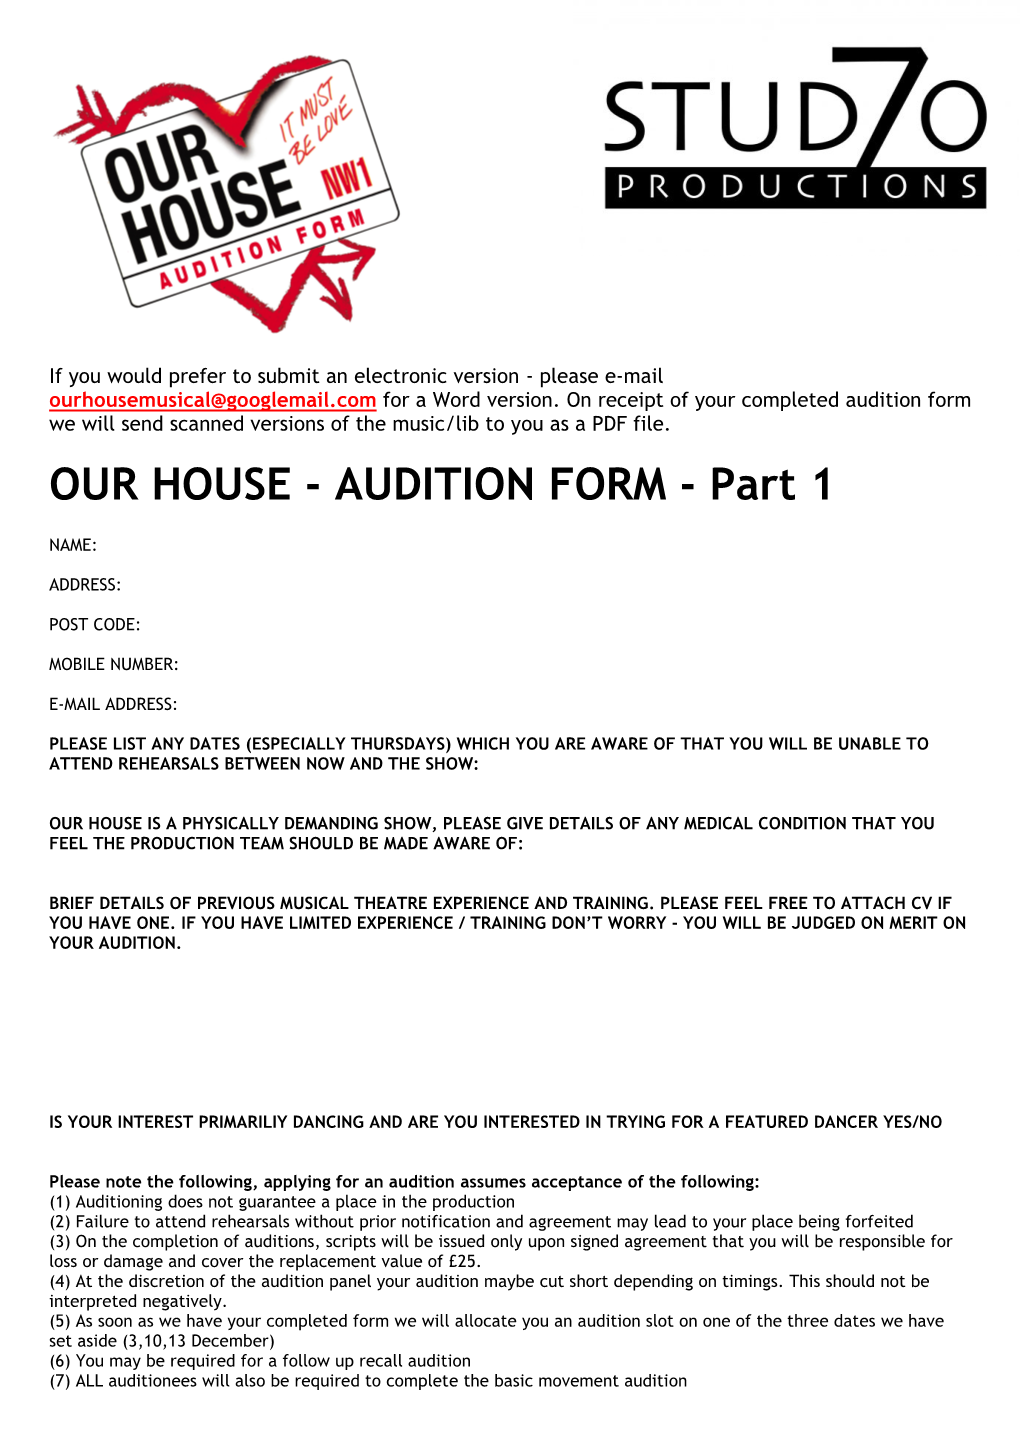 OUR HOUSE - AUDITION FORM - Part 1